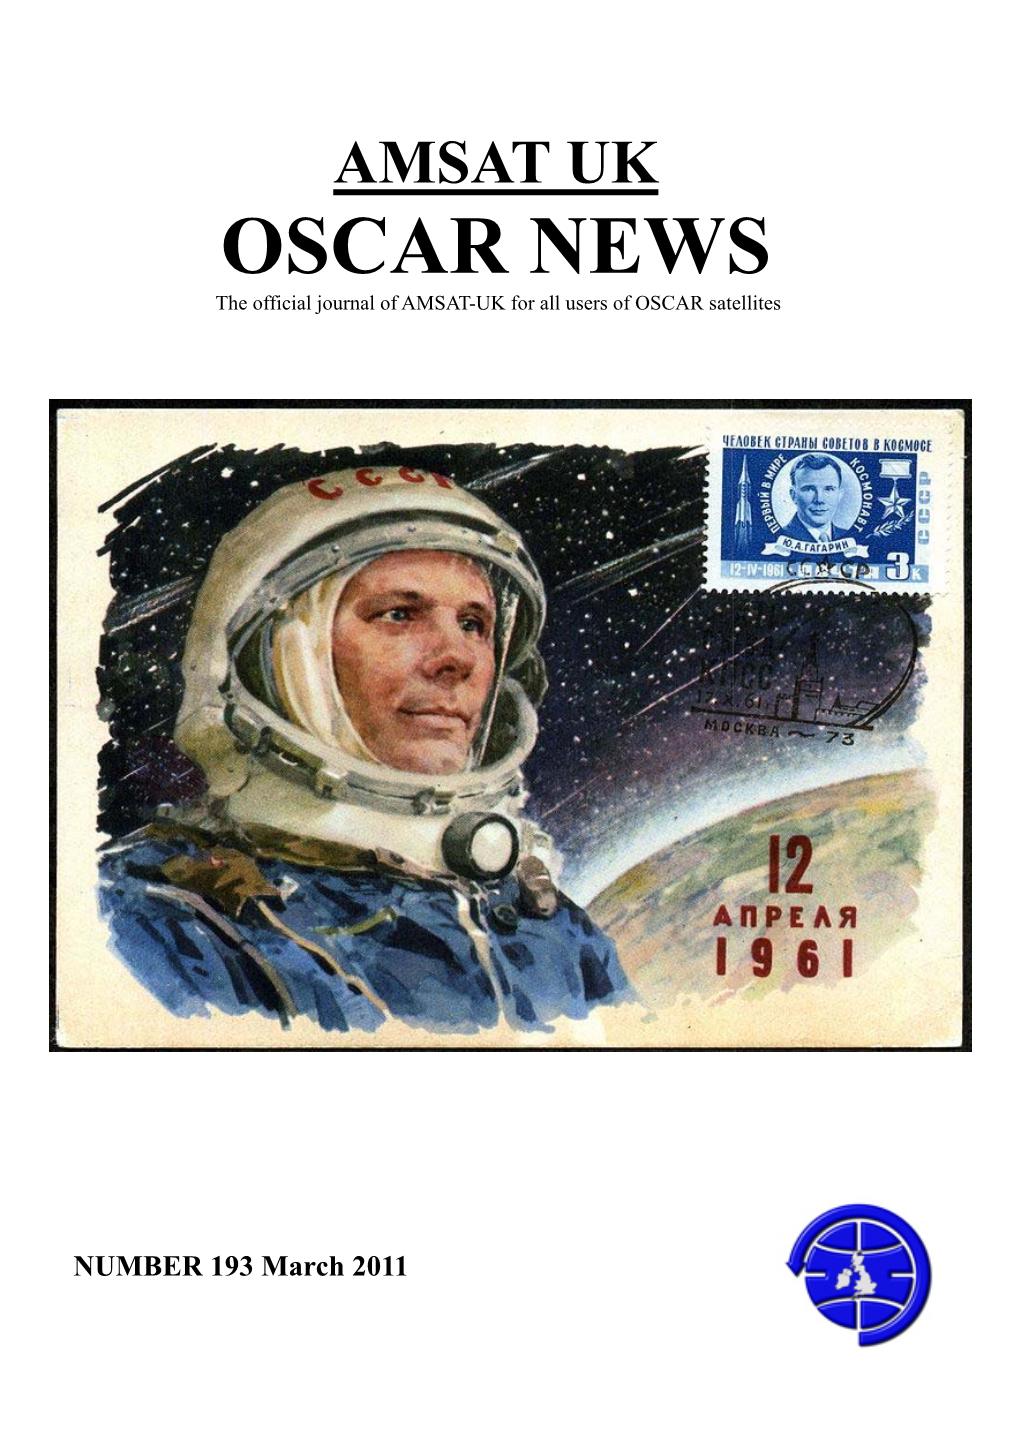 OSCAR NEWS the Official Journal of AMSAT-UK for All Users of OSCAR Satellites